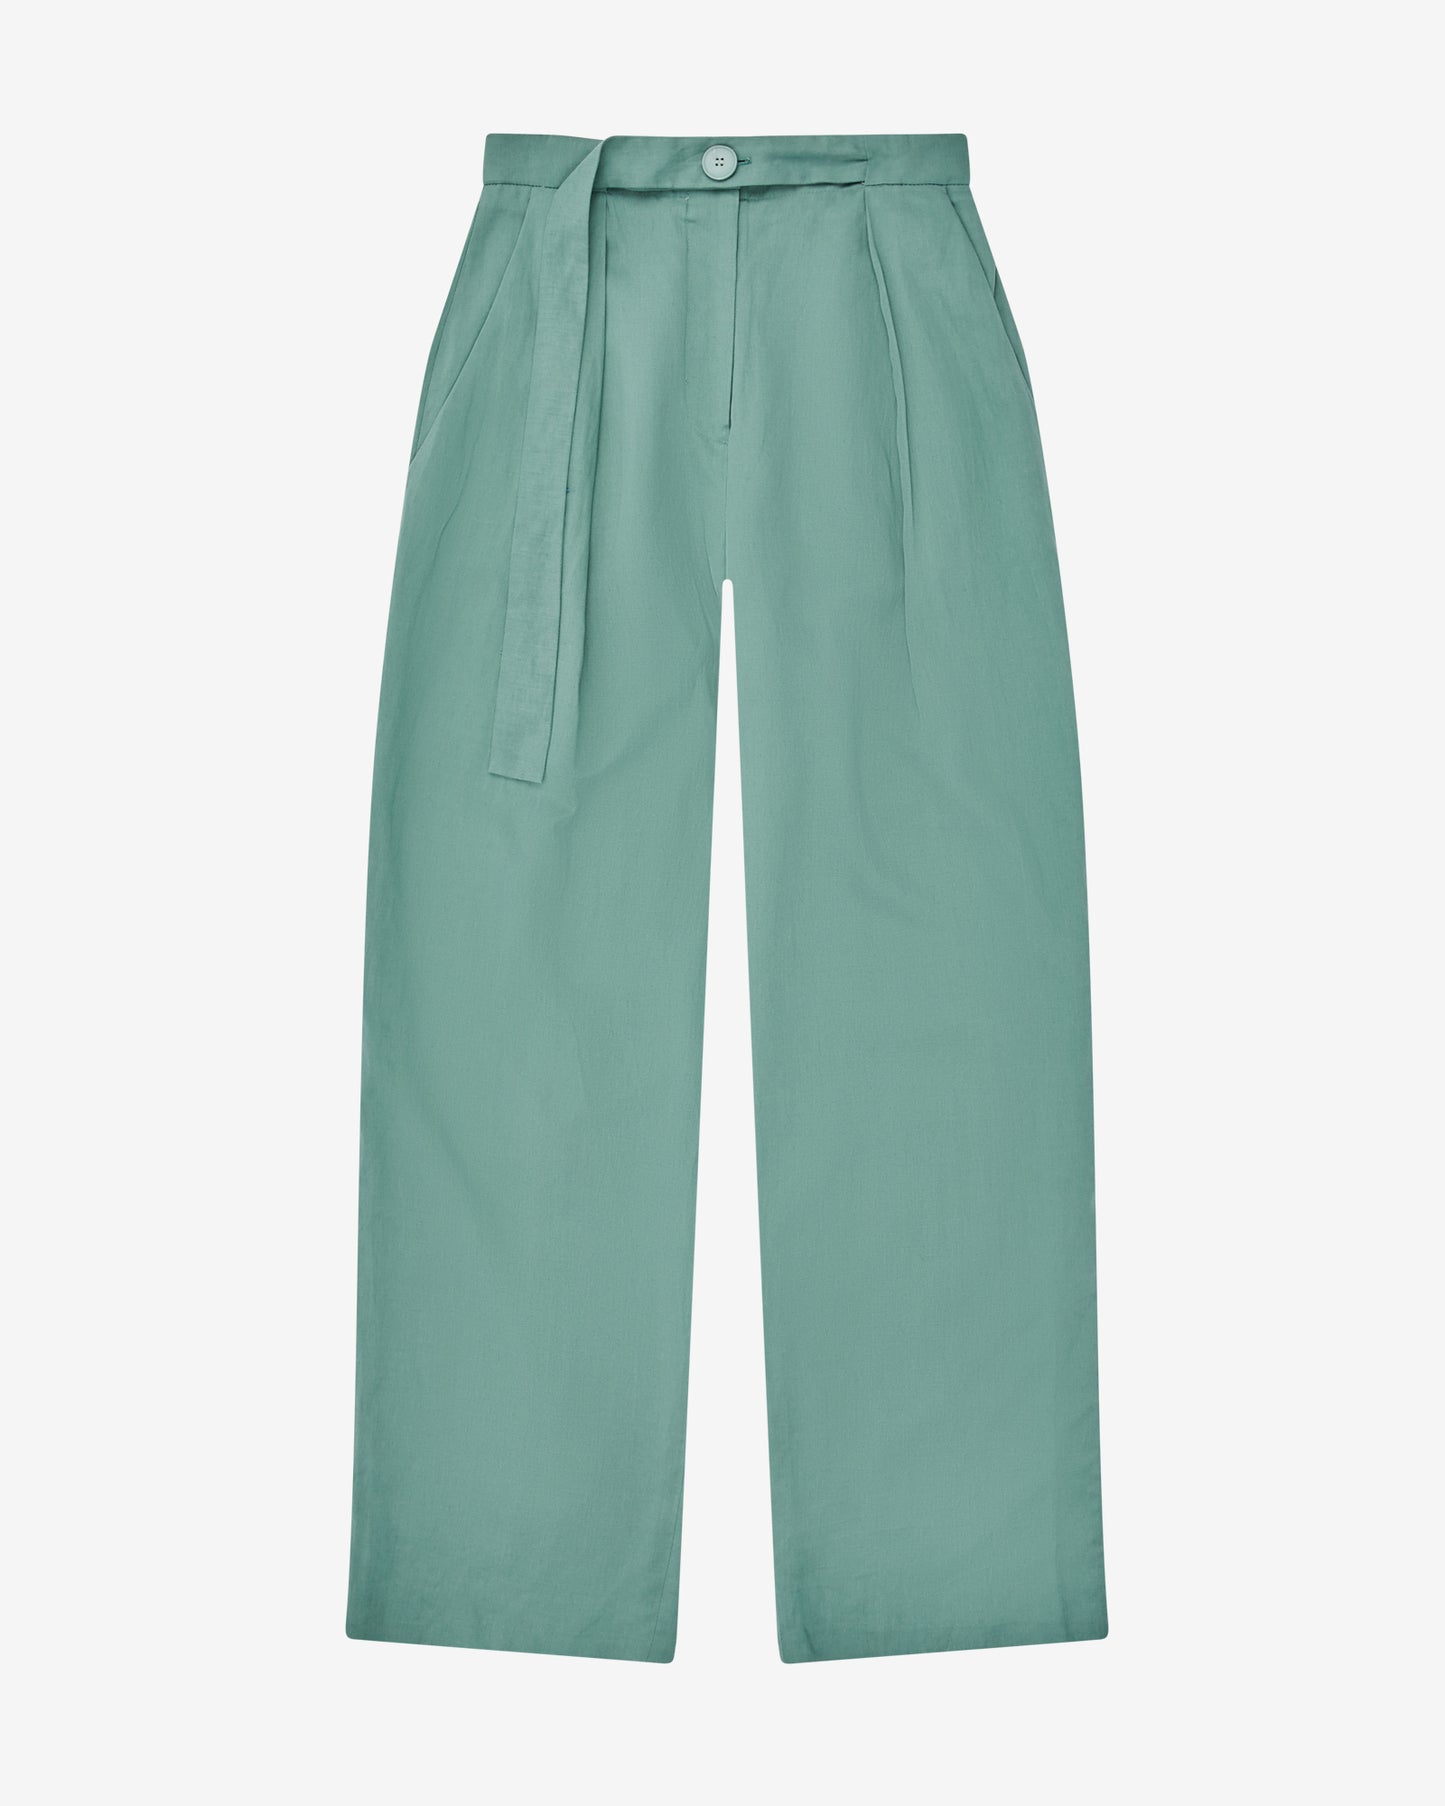 Utility Mac - Wrap and Tie Trouser